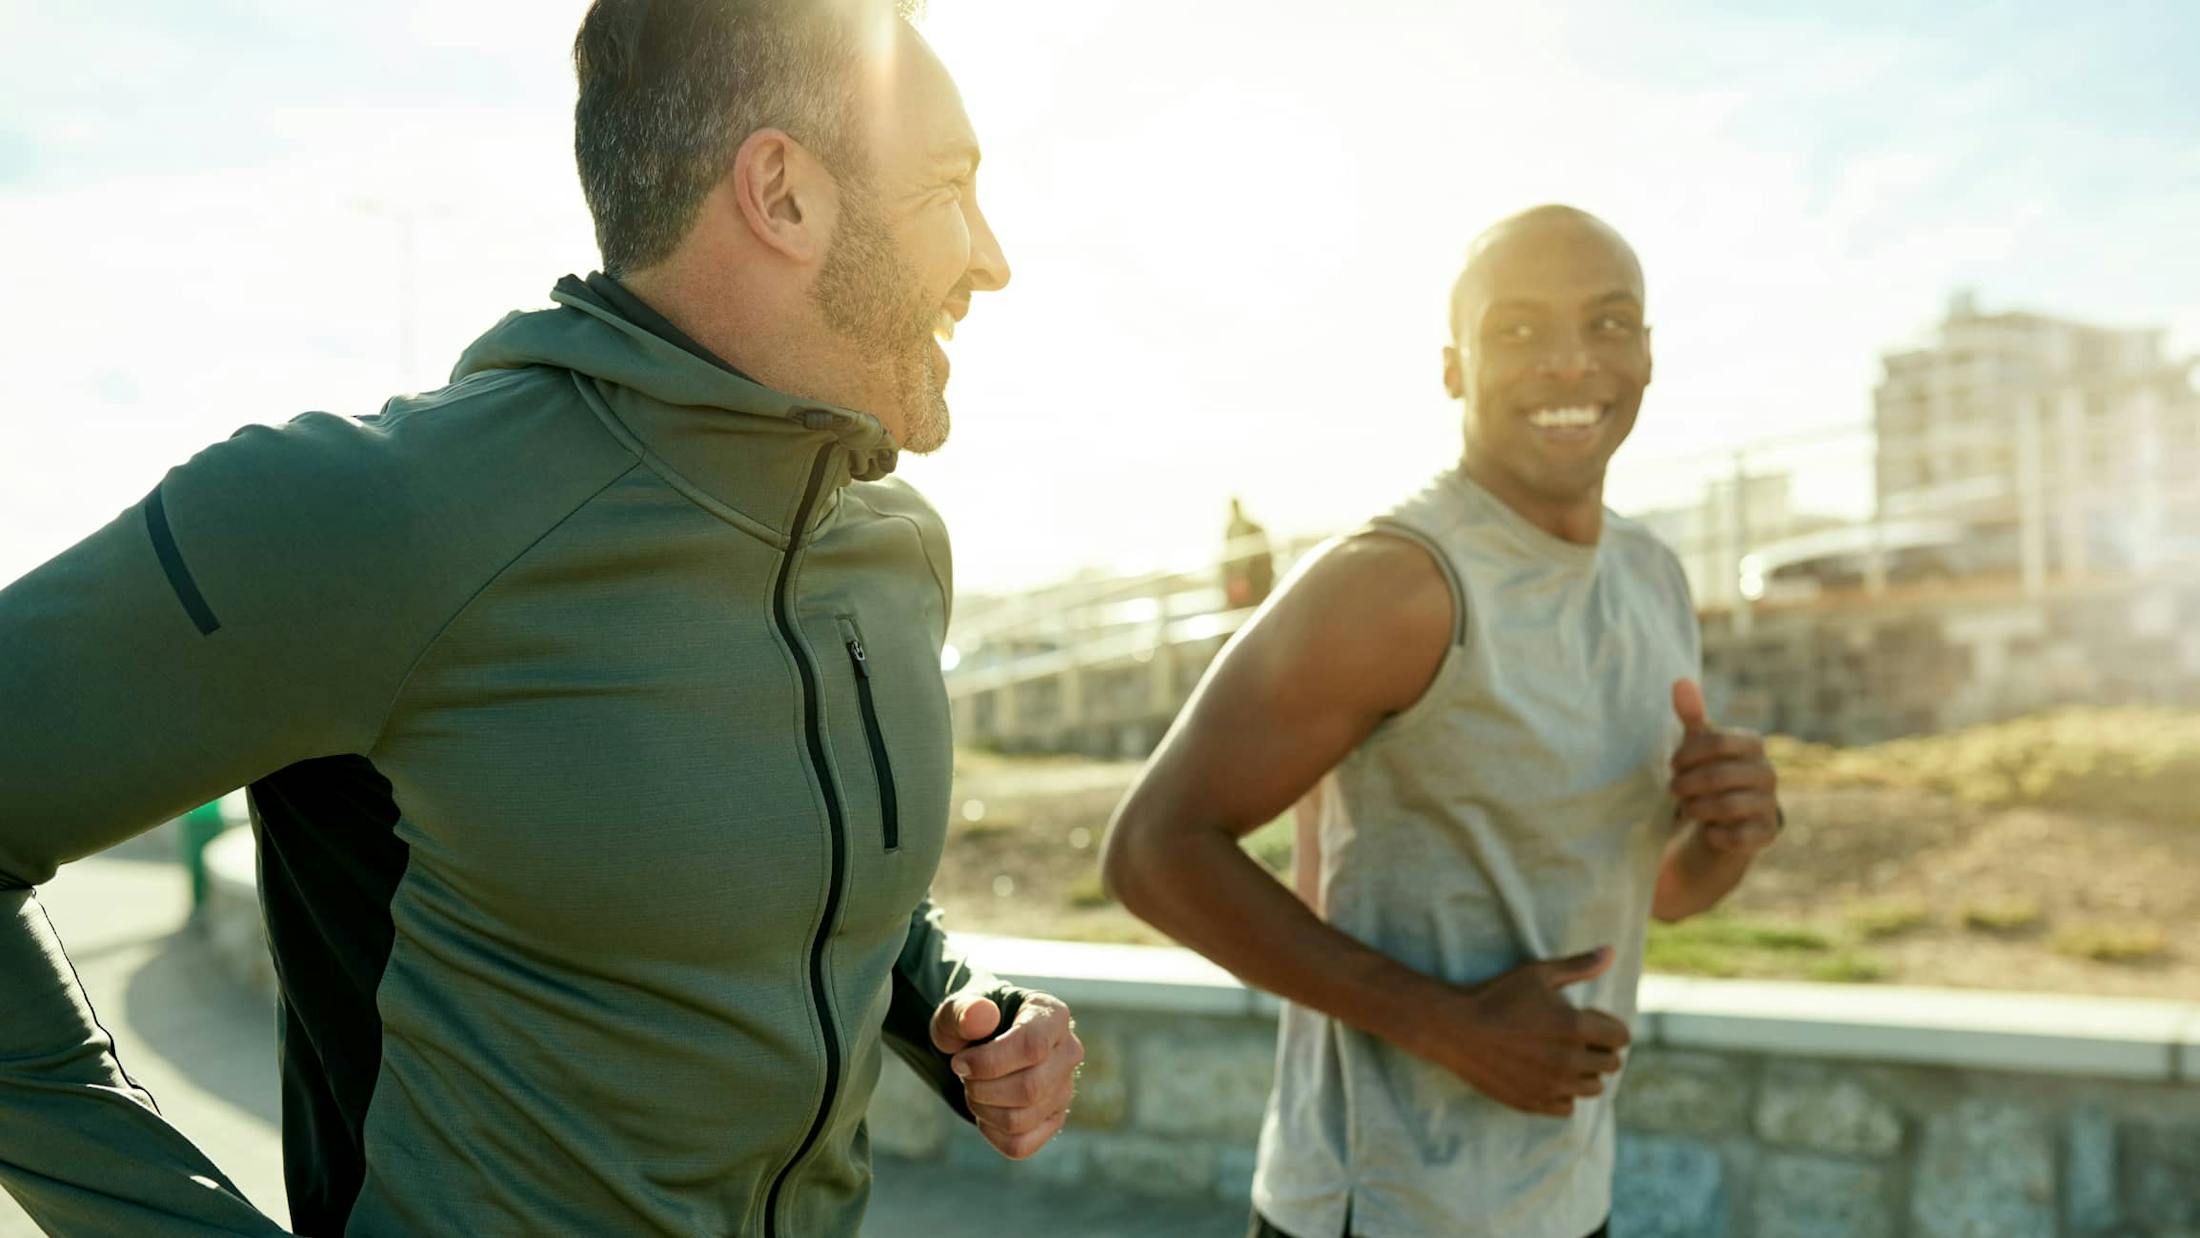 Two men jogging and smiling